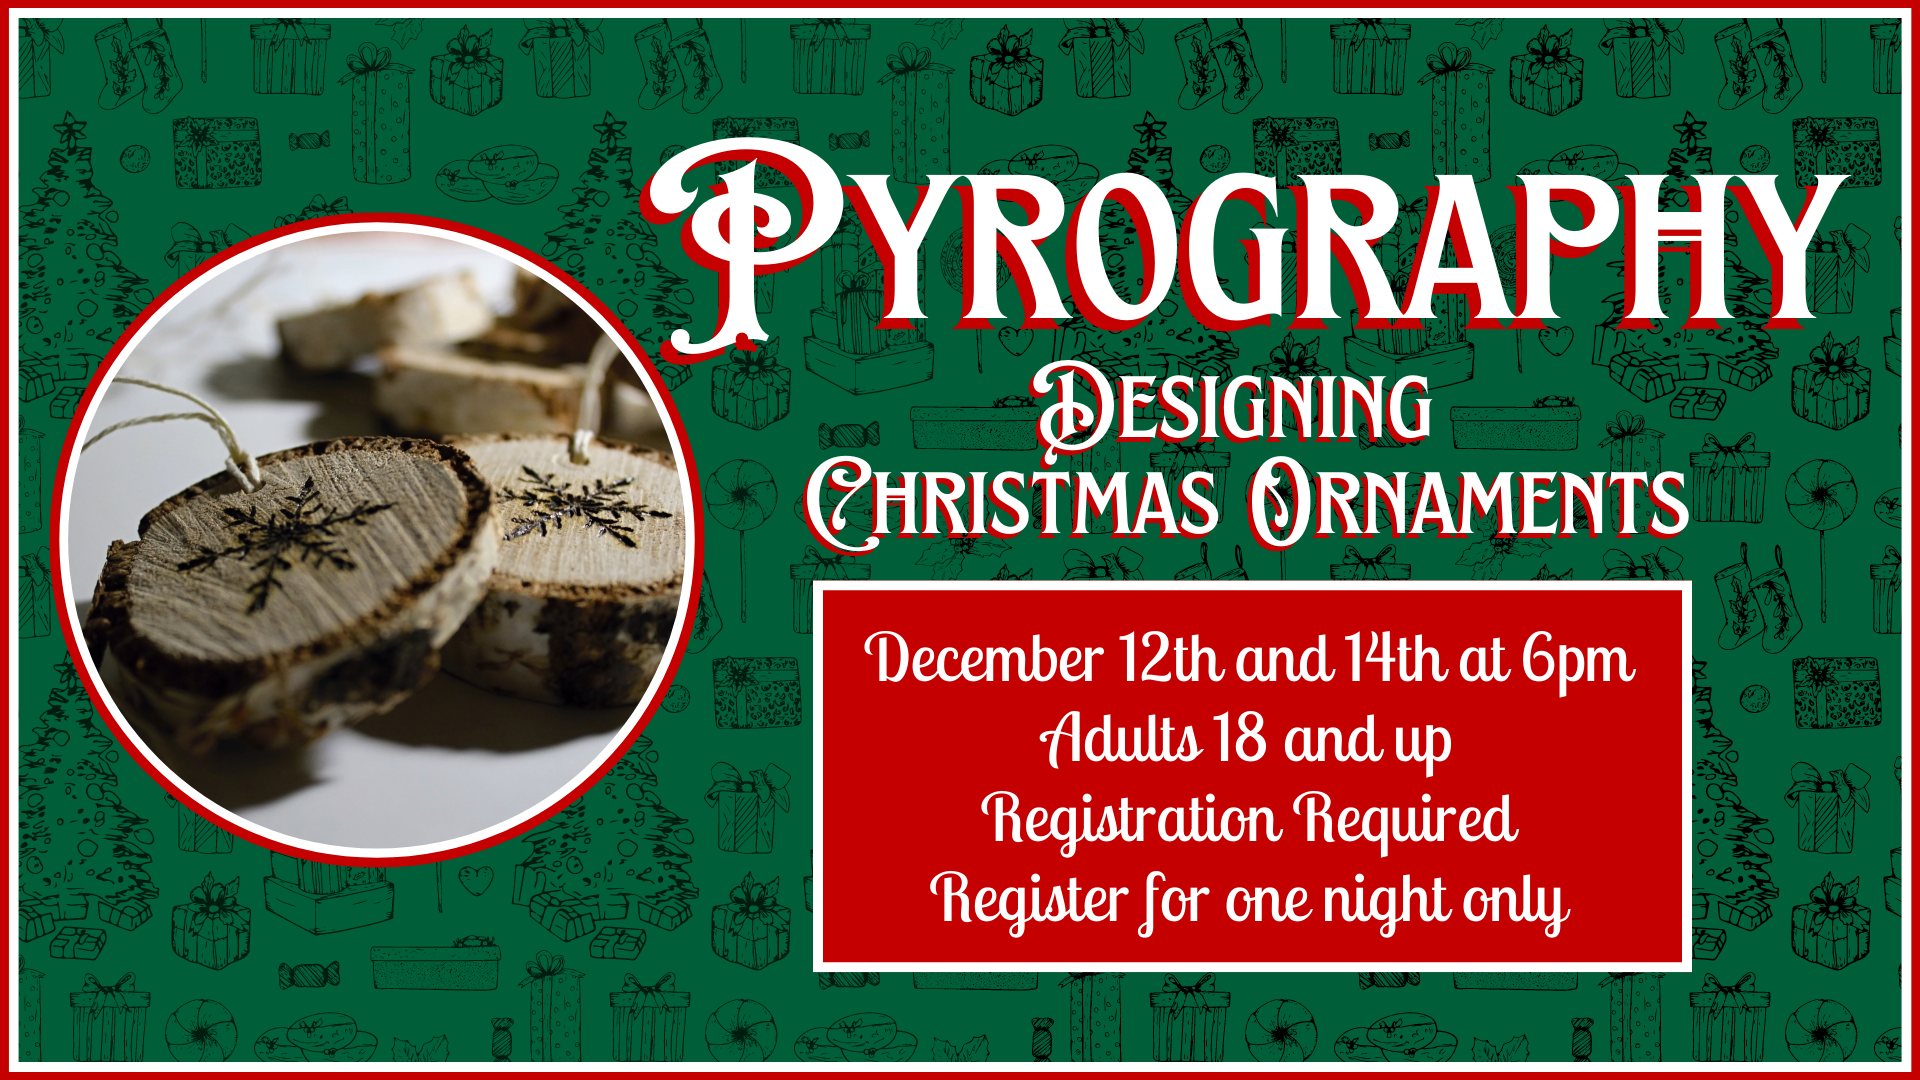 December 14th Pyrography Ornaments, Bronte Room 6pm, Adults only event